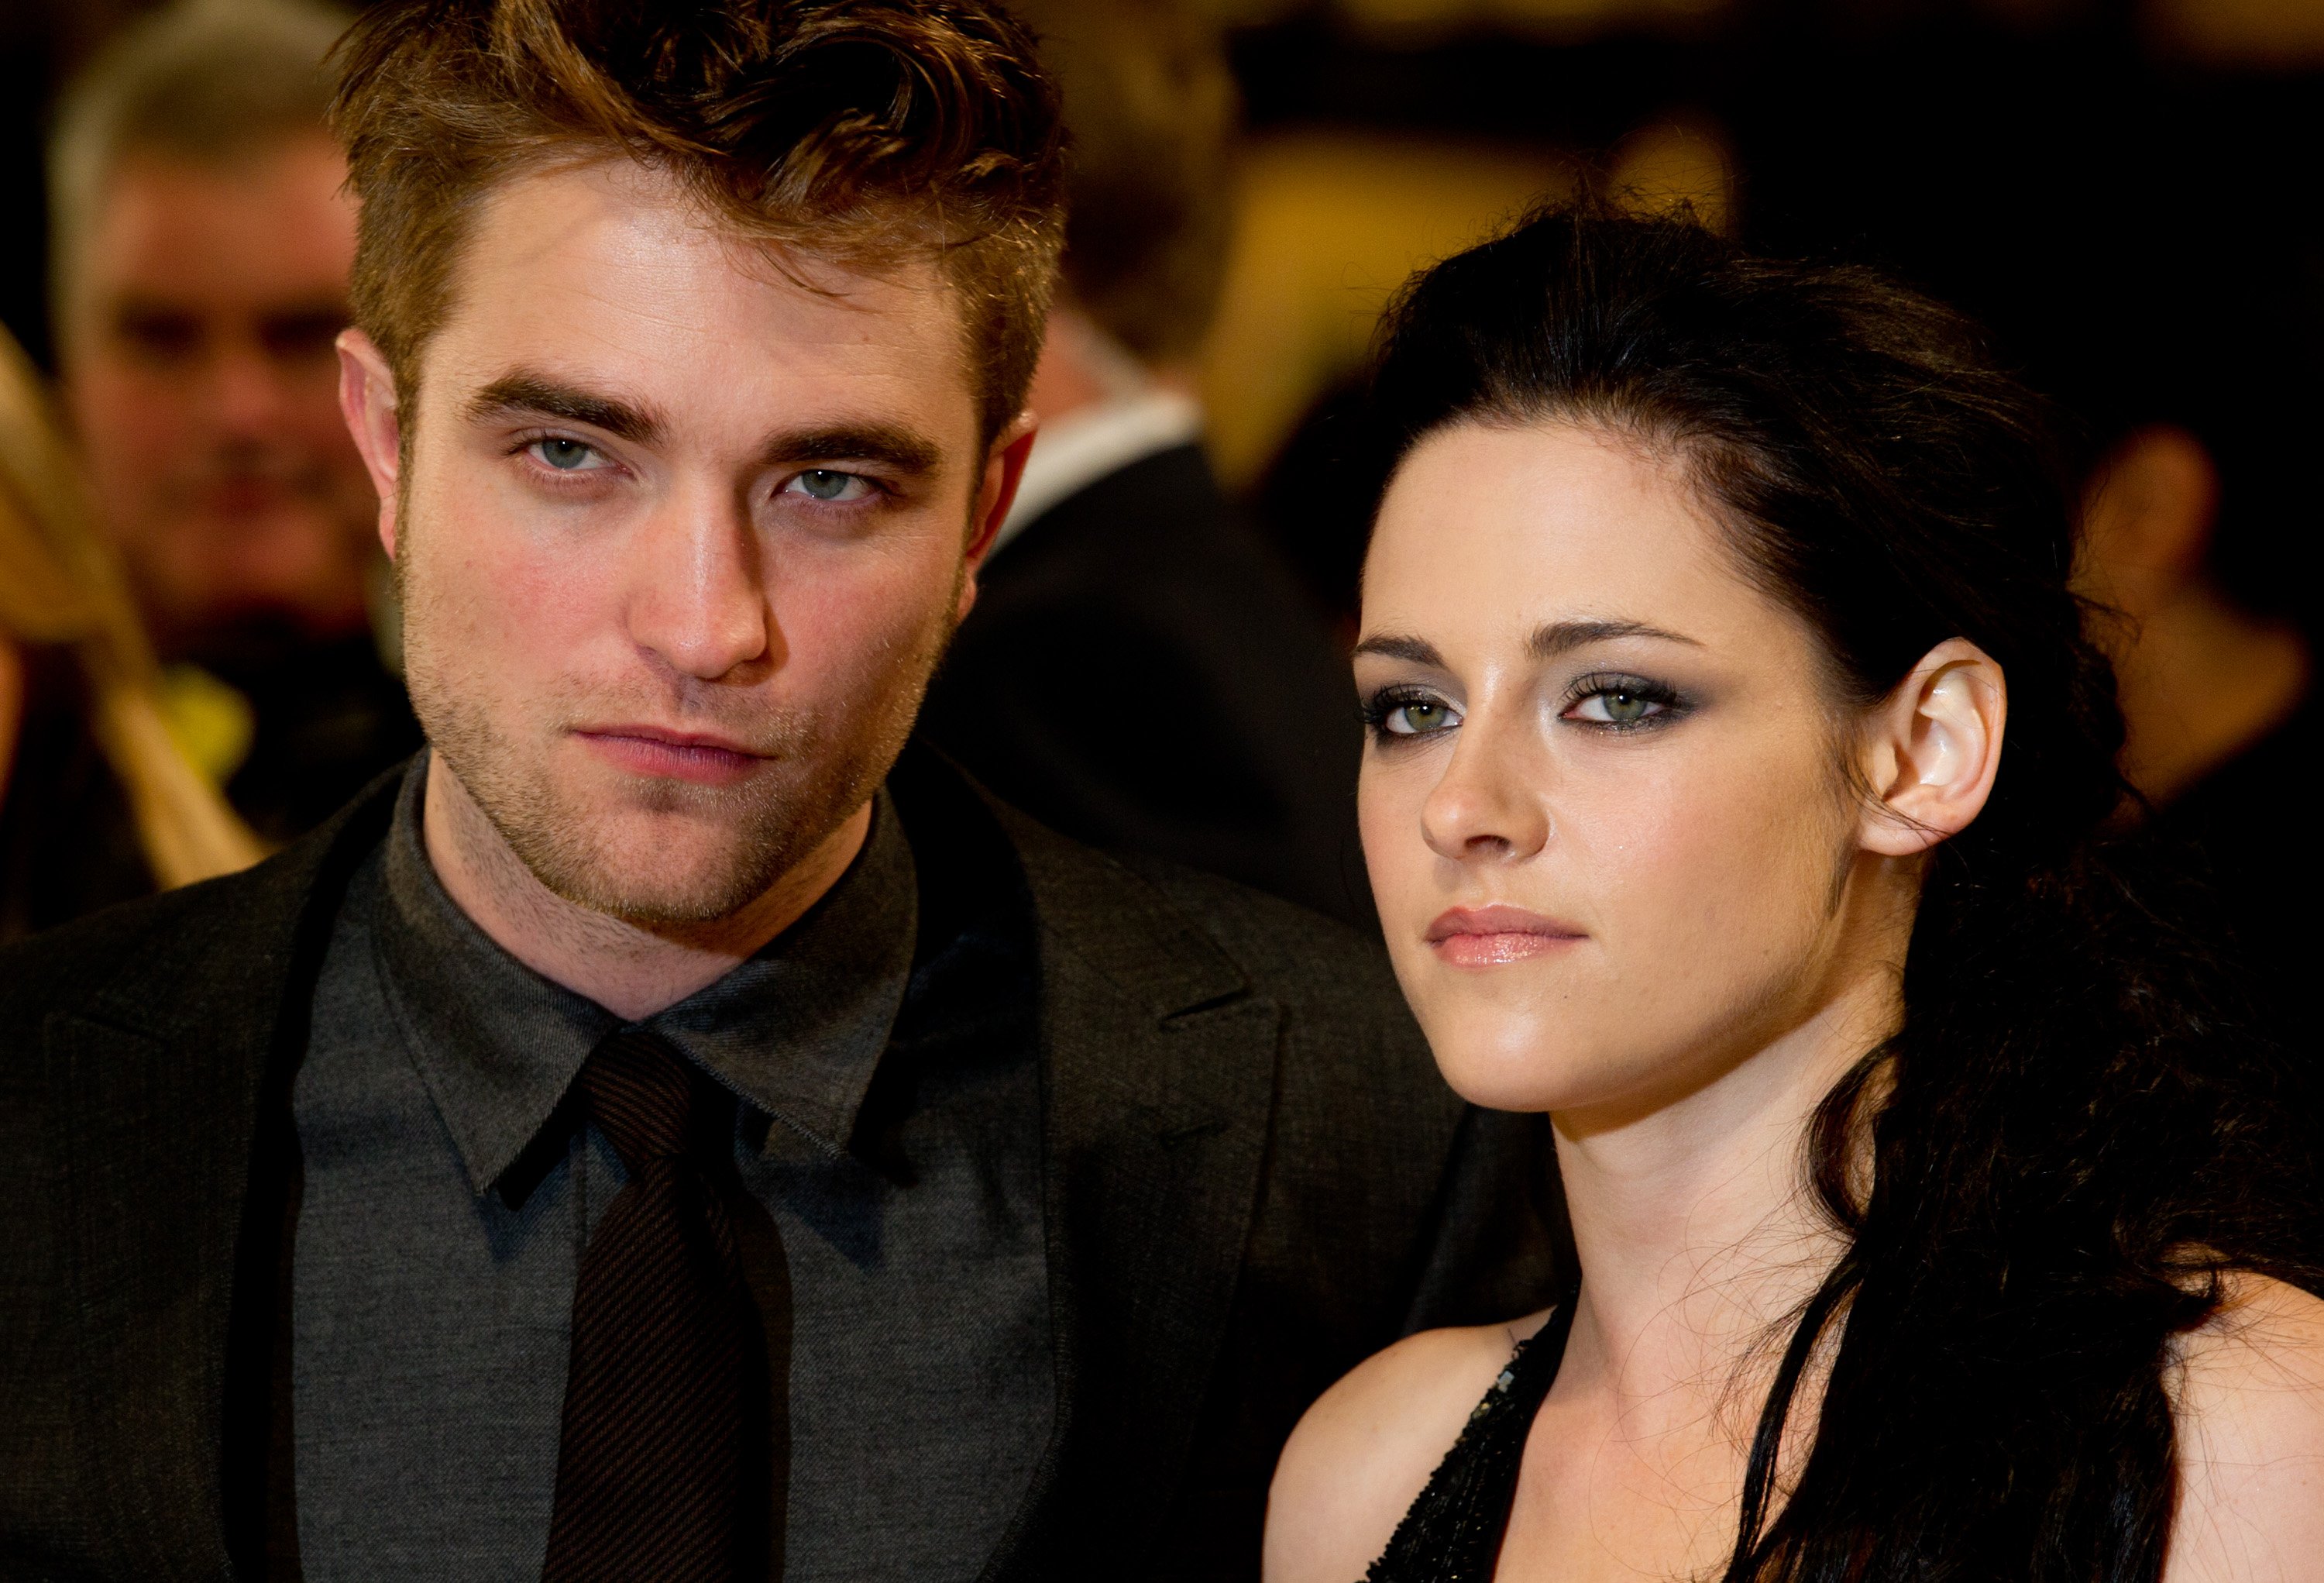 Robert Pattinson and Kristen Stewart attend the UK premiere of "The Twilight Saga: Breaking Dawn Part 1" at Westfield Stratford City on November 16, 2011 in London, England. | Source: Getty Images